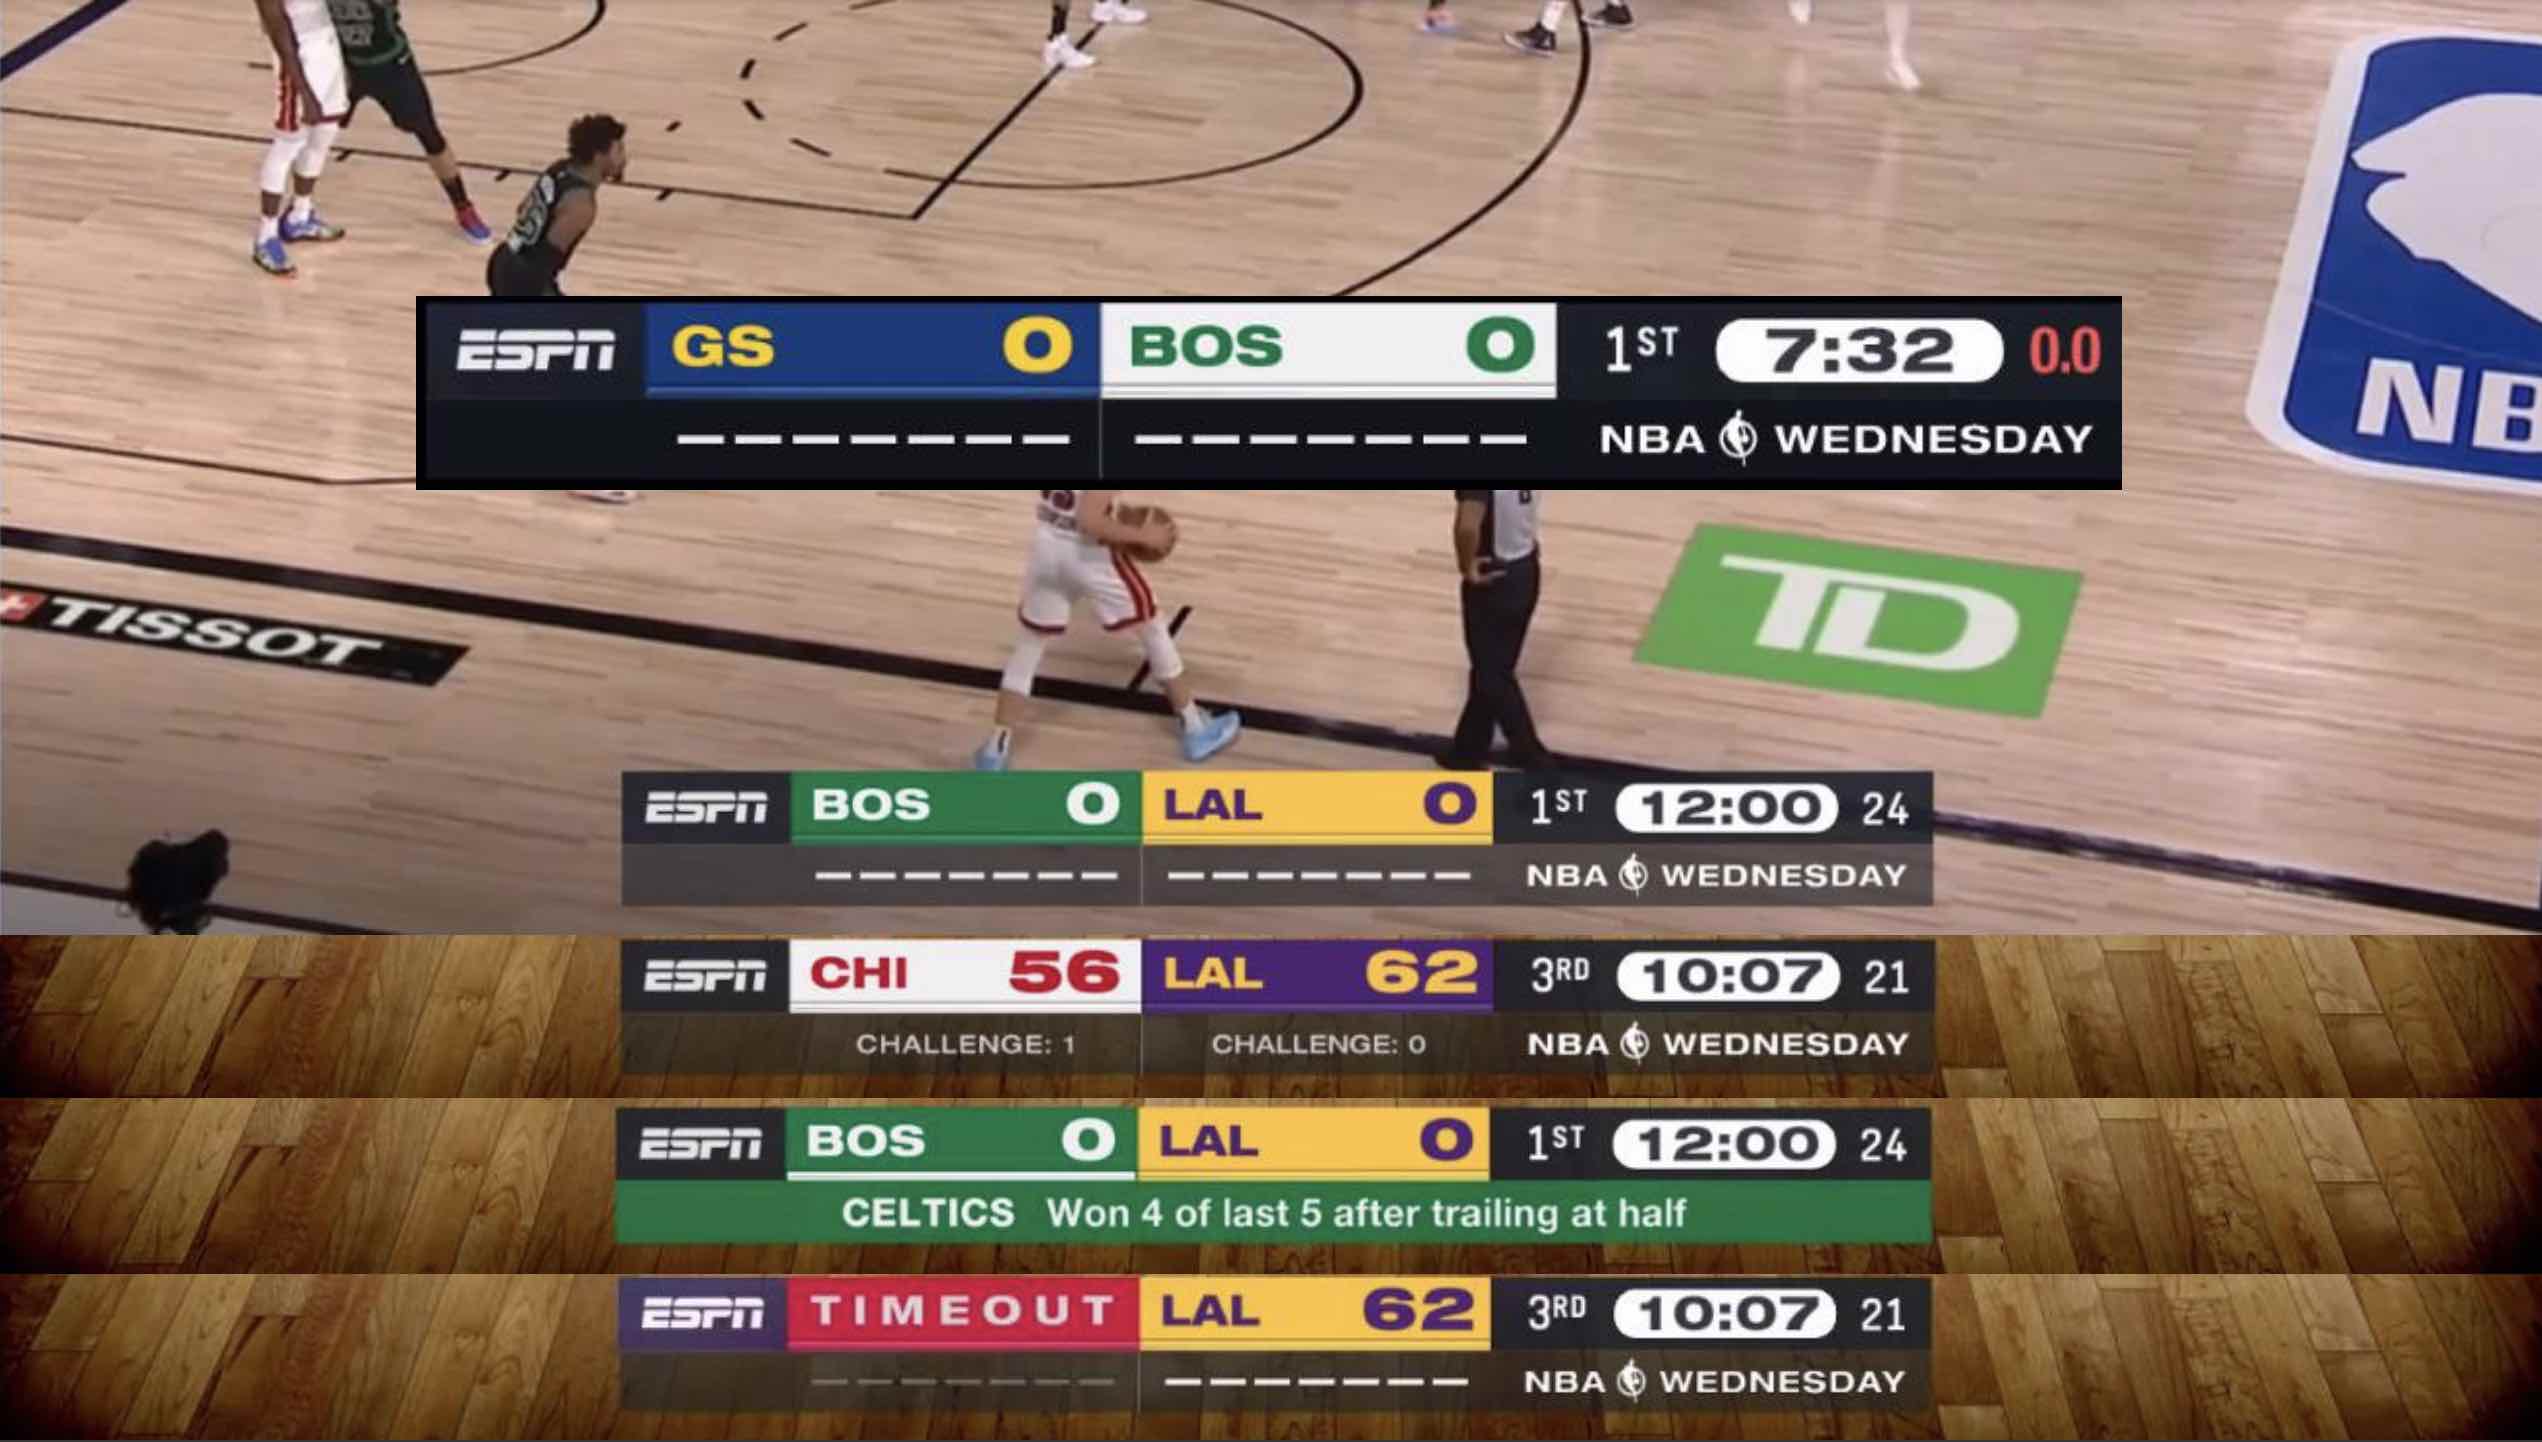 nba-tipoff-2022-espn-enters-upcoming-season-with-new-graphics-package-test-of-sideline-pylon-cams